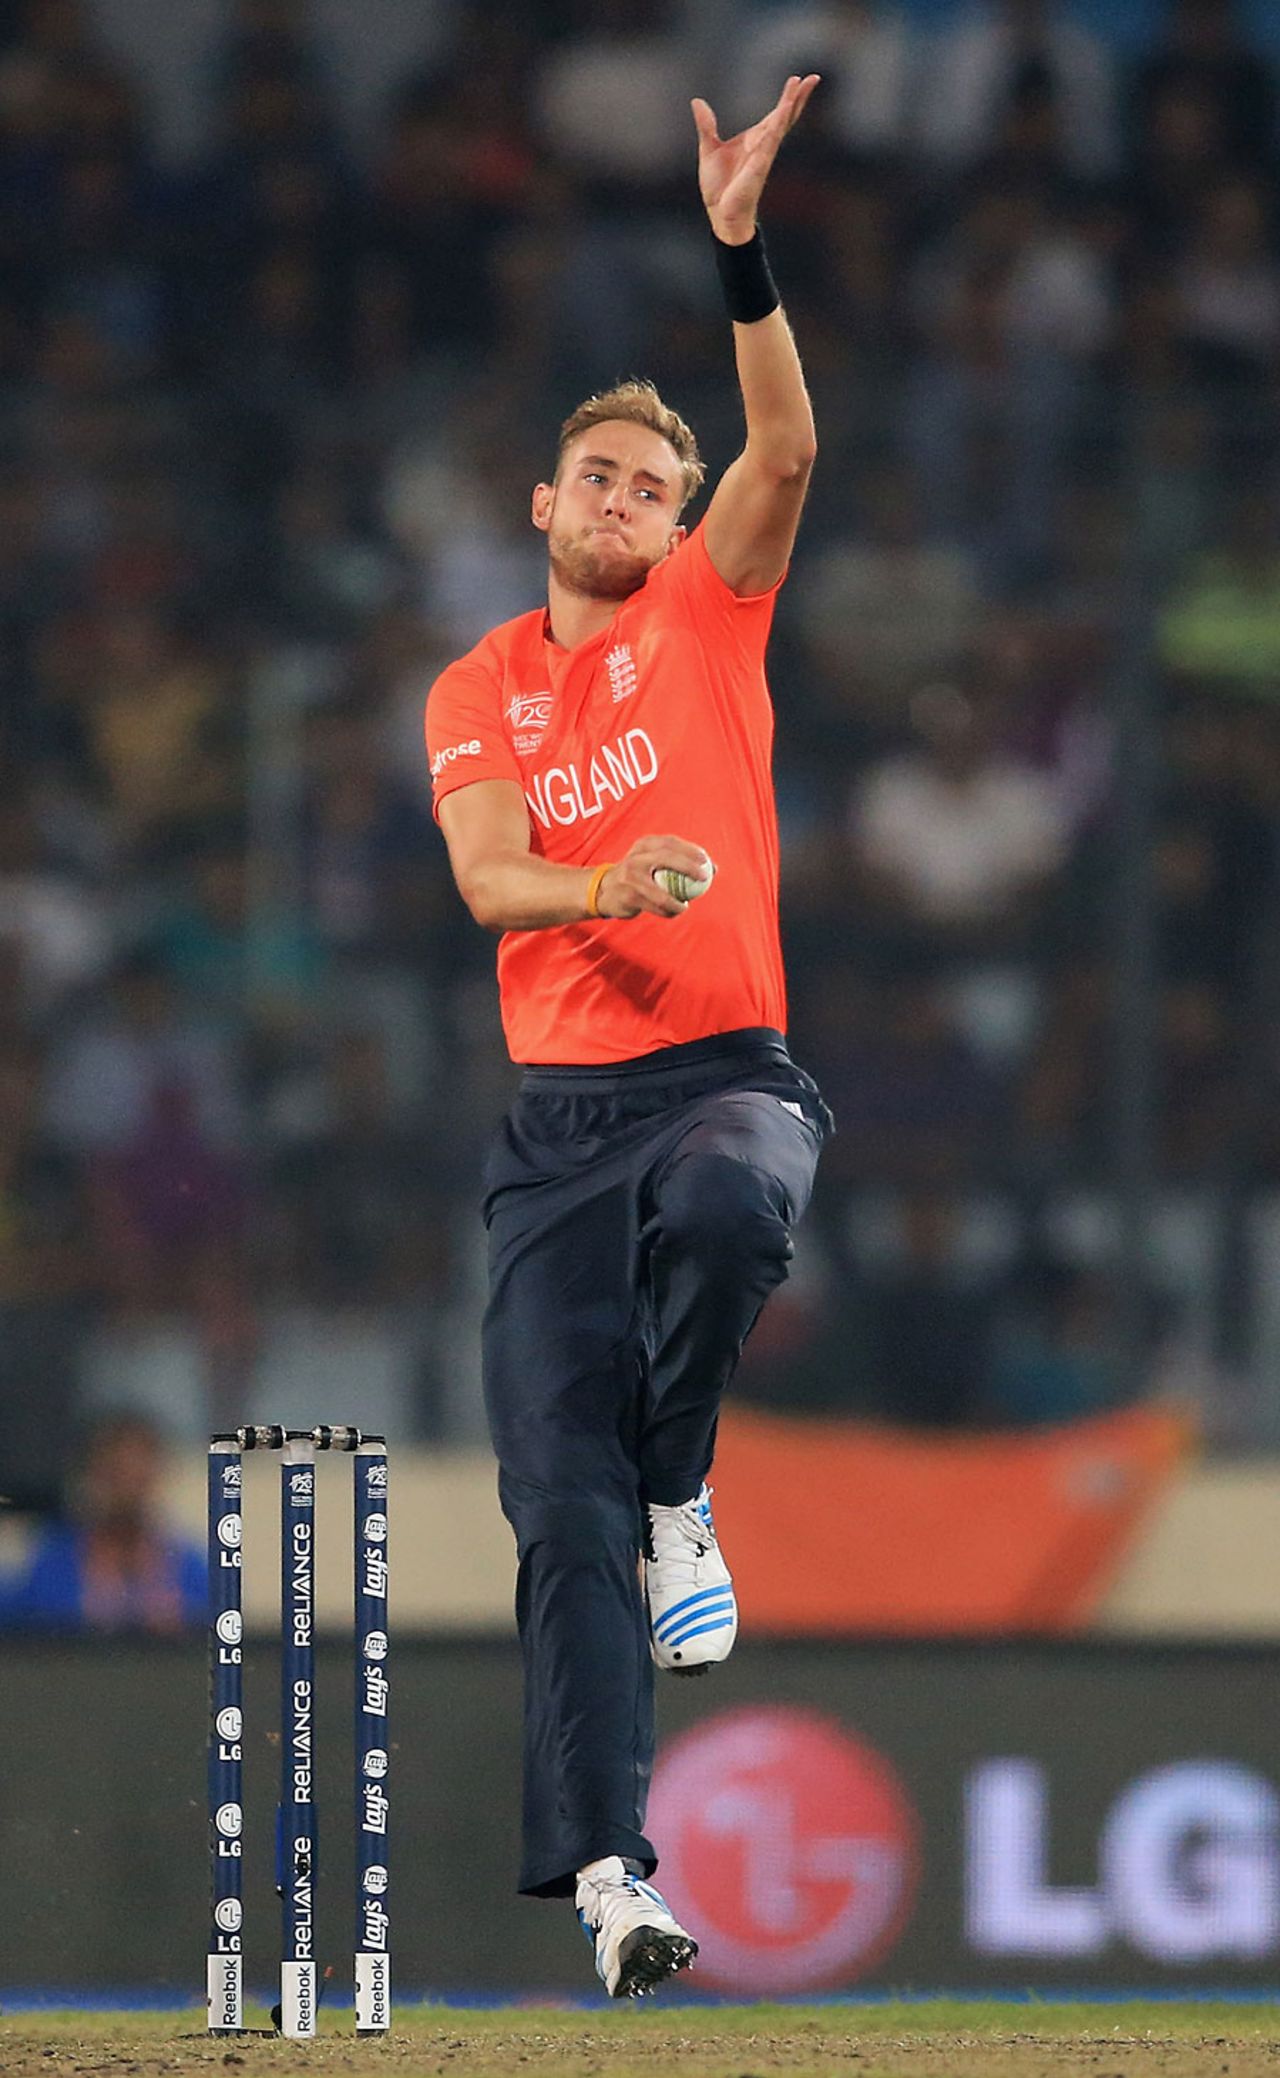 Stuart Broad tests out his troublesome knee, England v India, World Twenty20 warm-ups, Mirpur, March 19, 2014